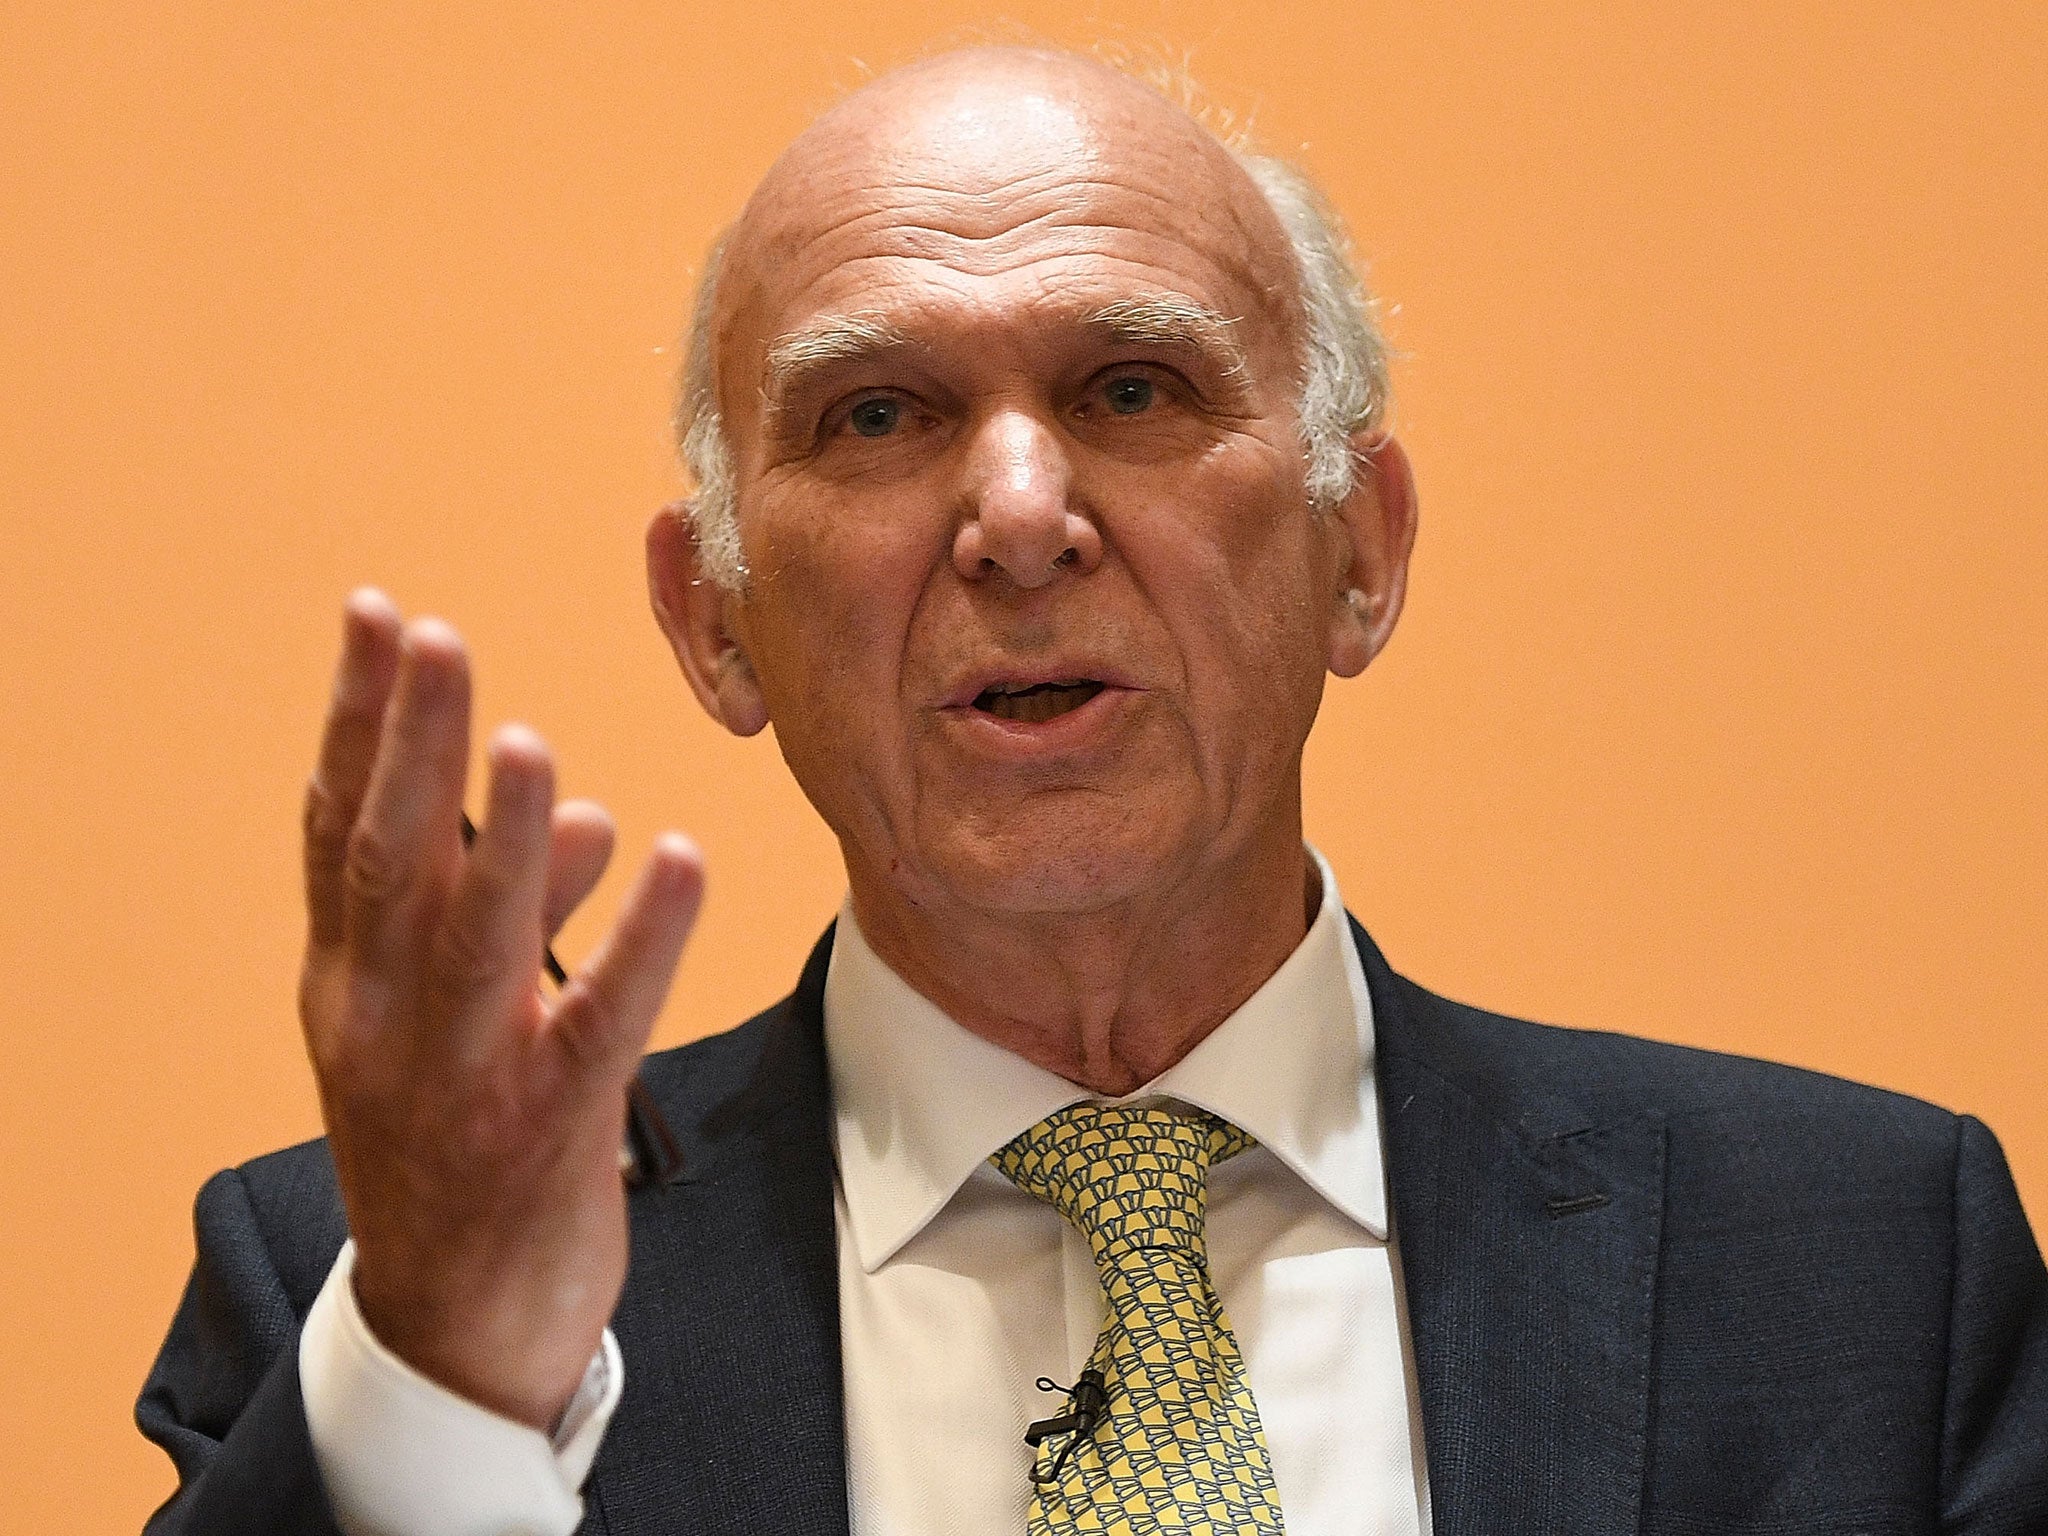 Liberal Democrats leader Vince Cable is opposed to Brexit and believes the UK should hold a second referendum